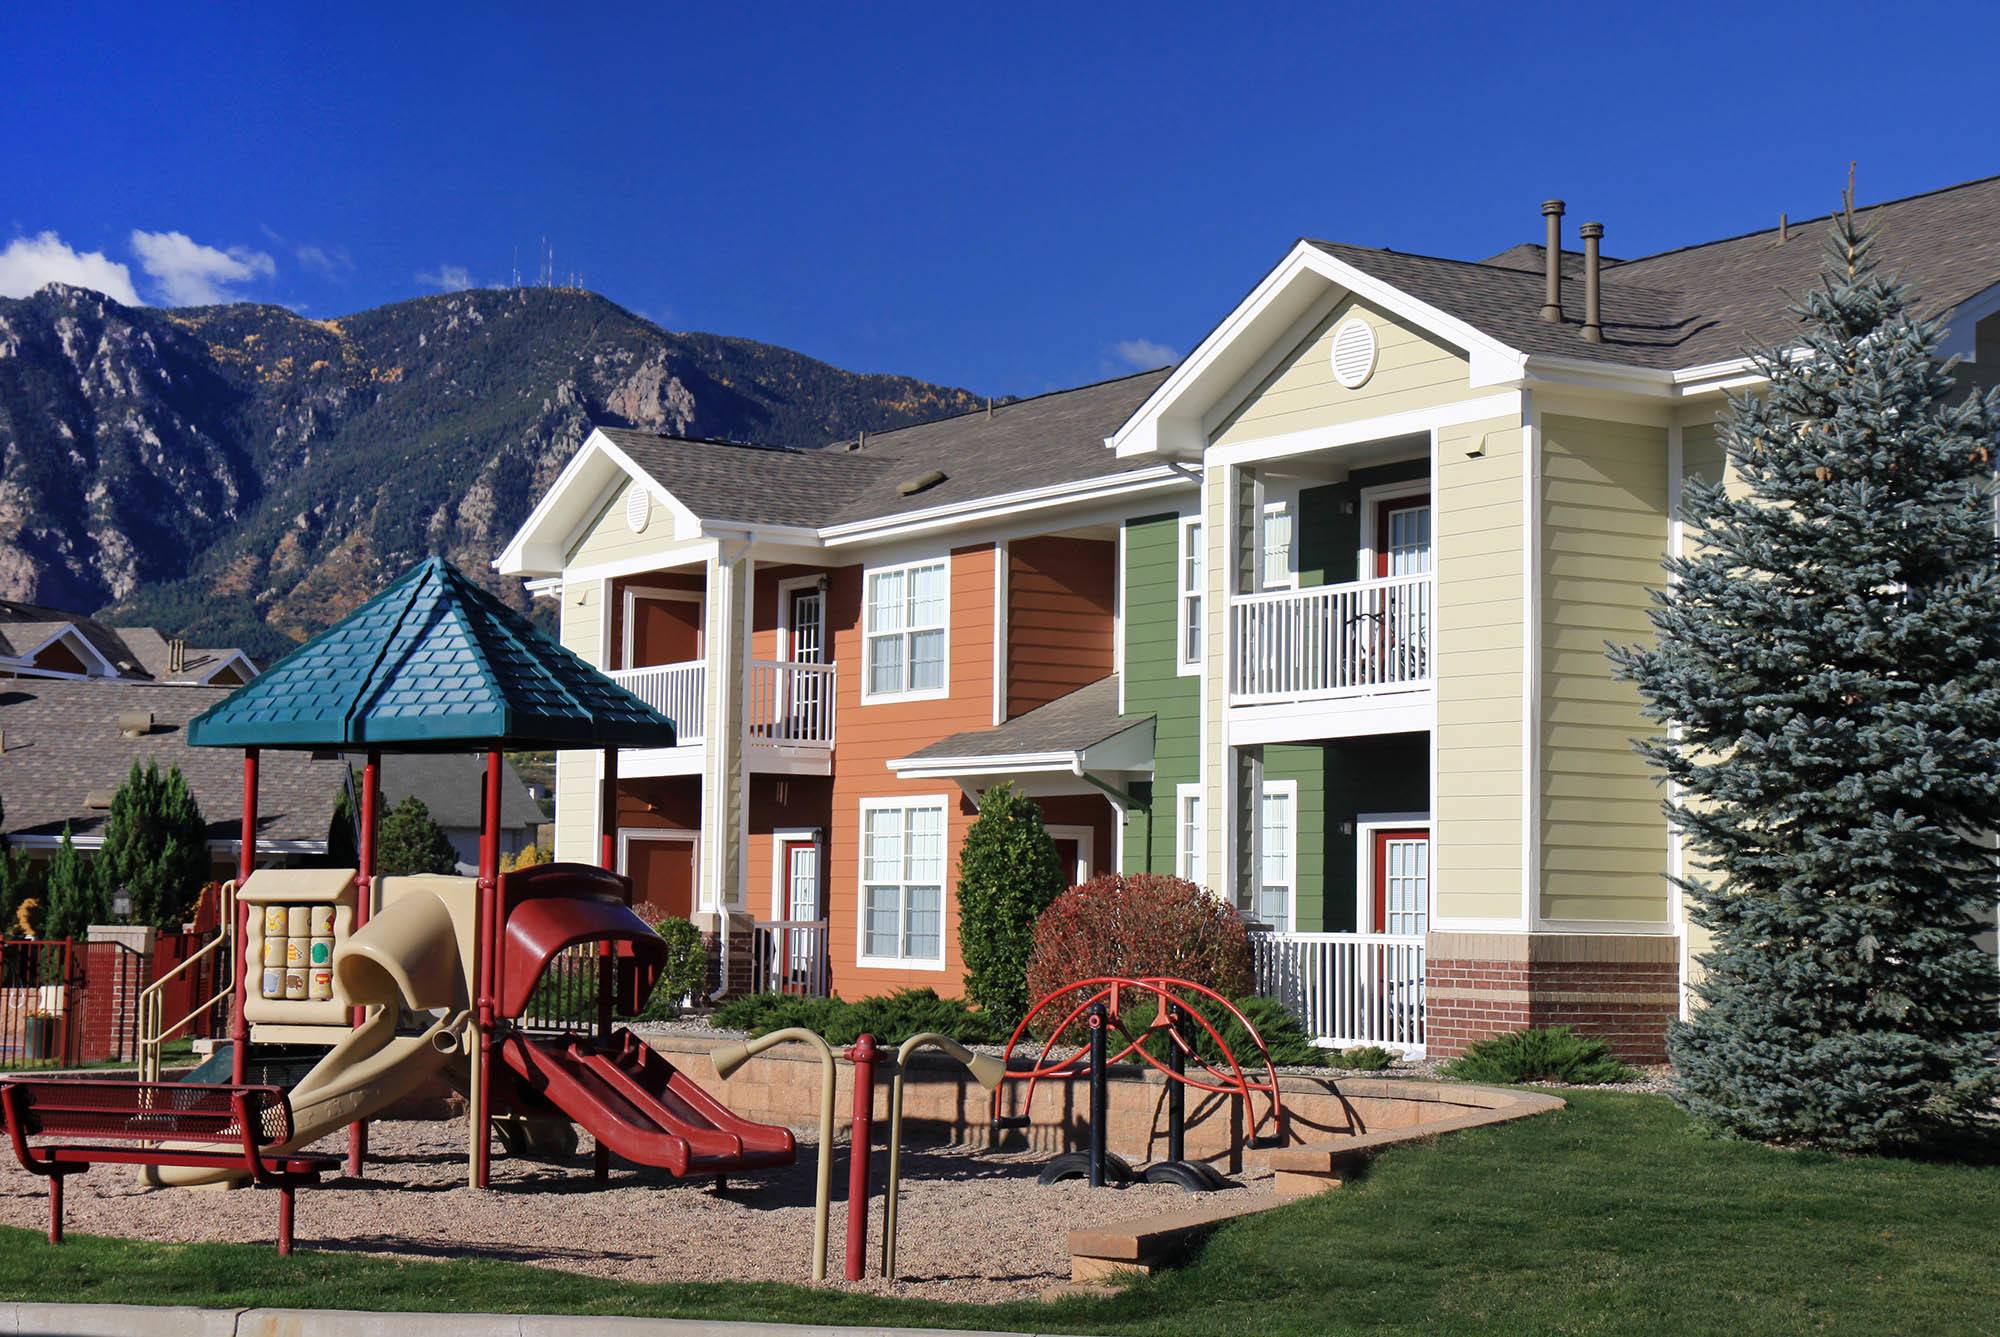 Printable List Of Section 8 Apartments In Colorado Springs Co